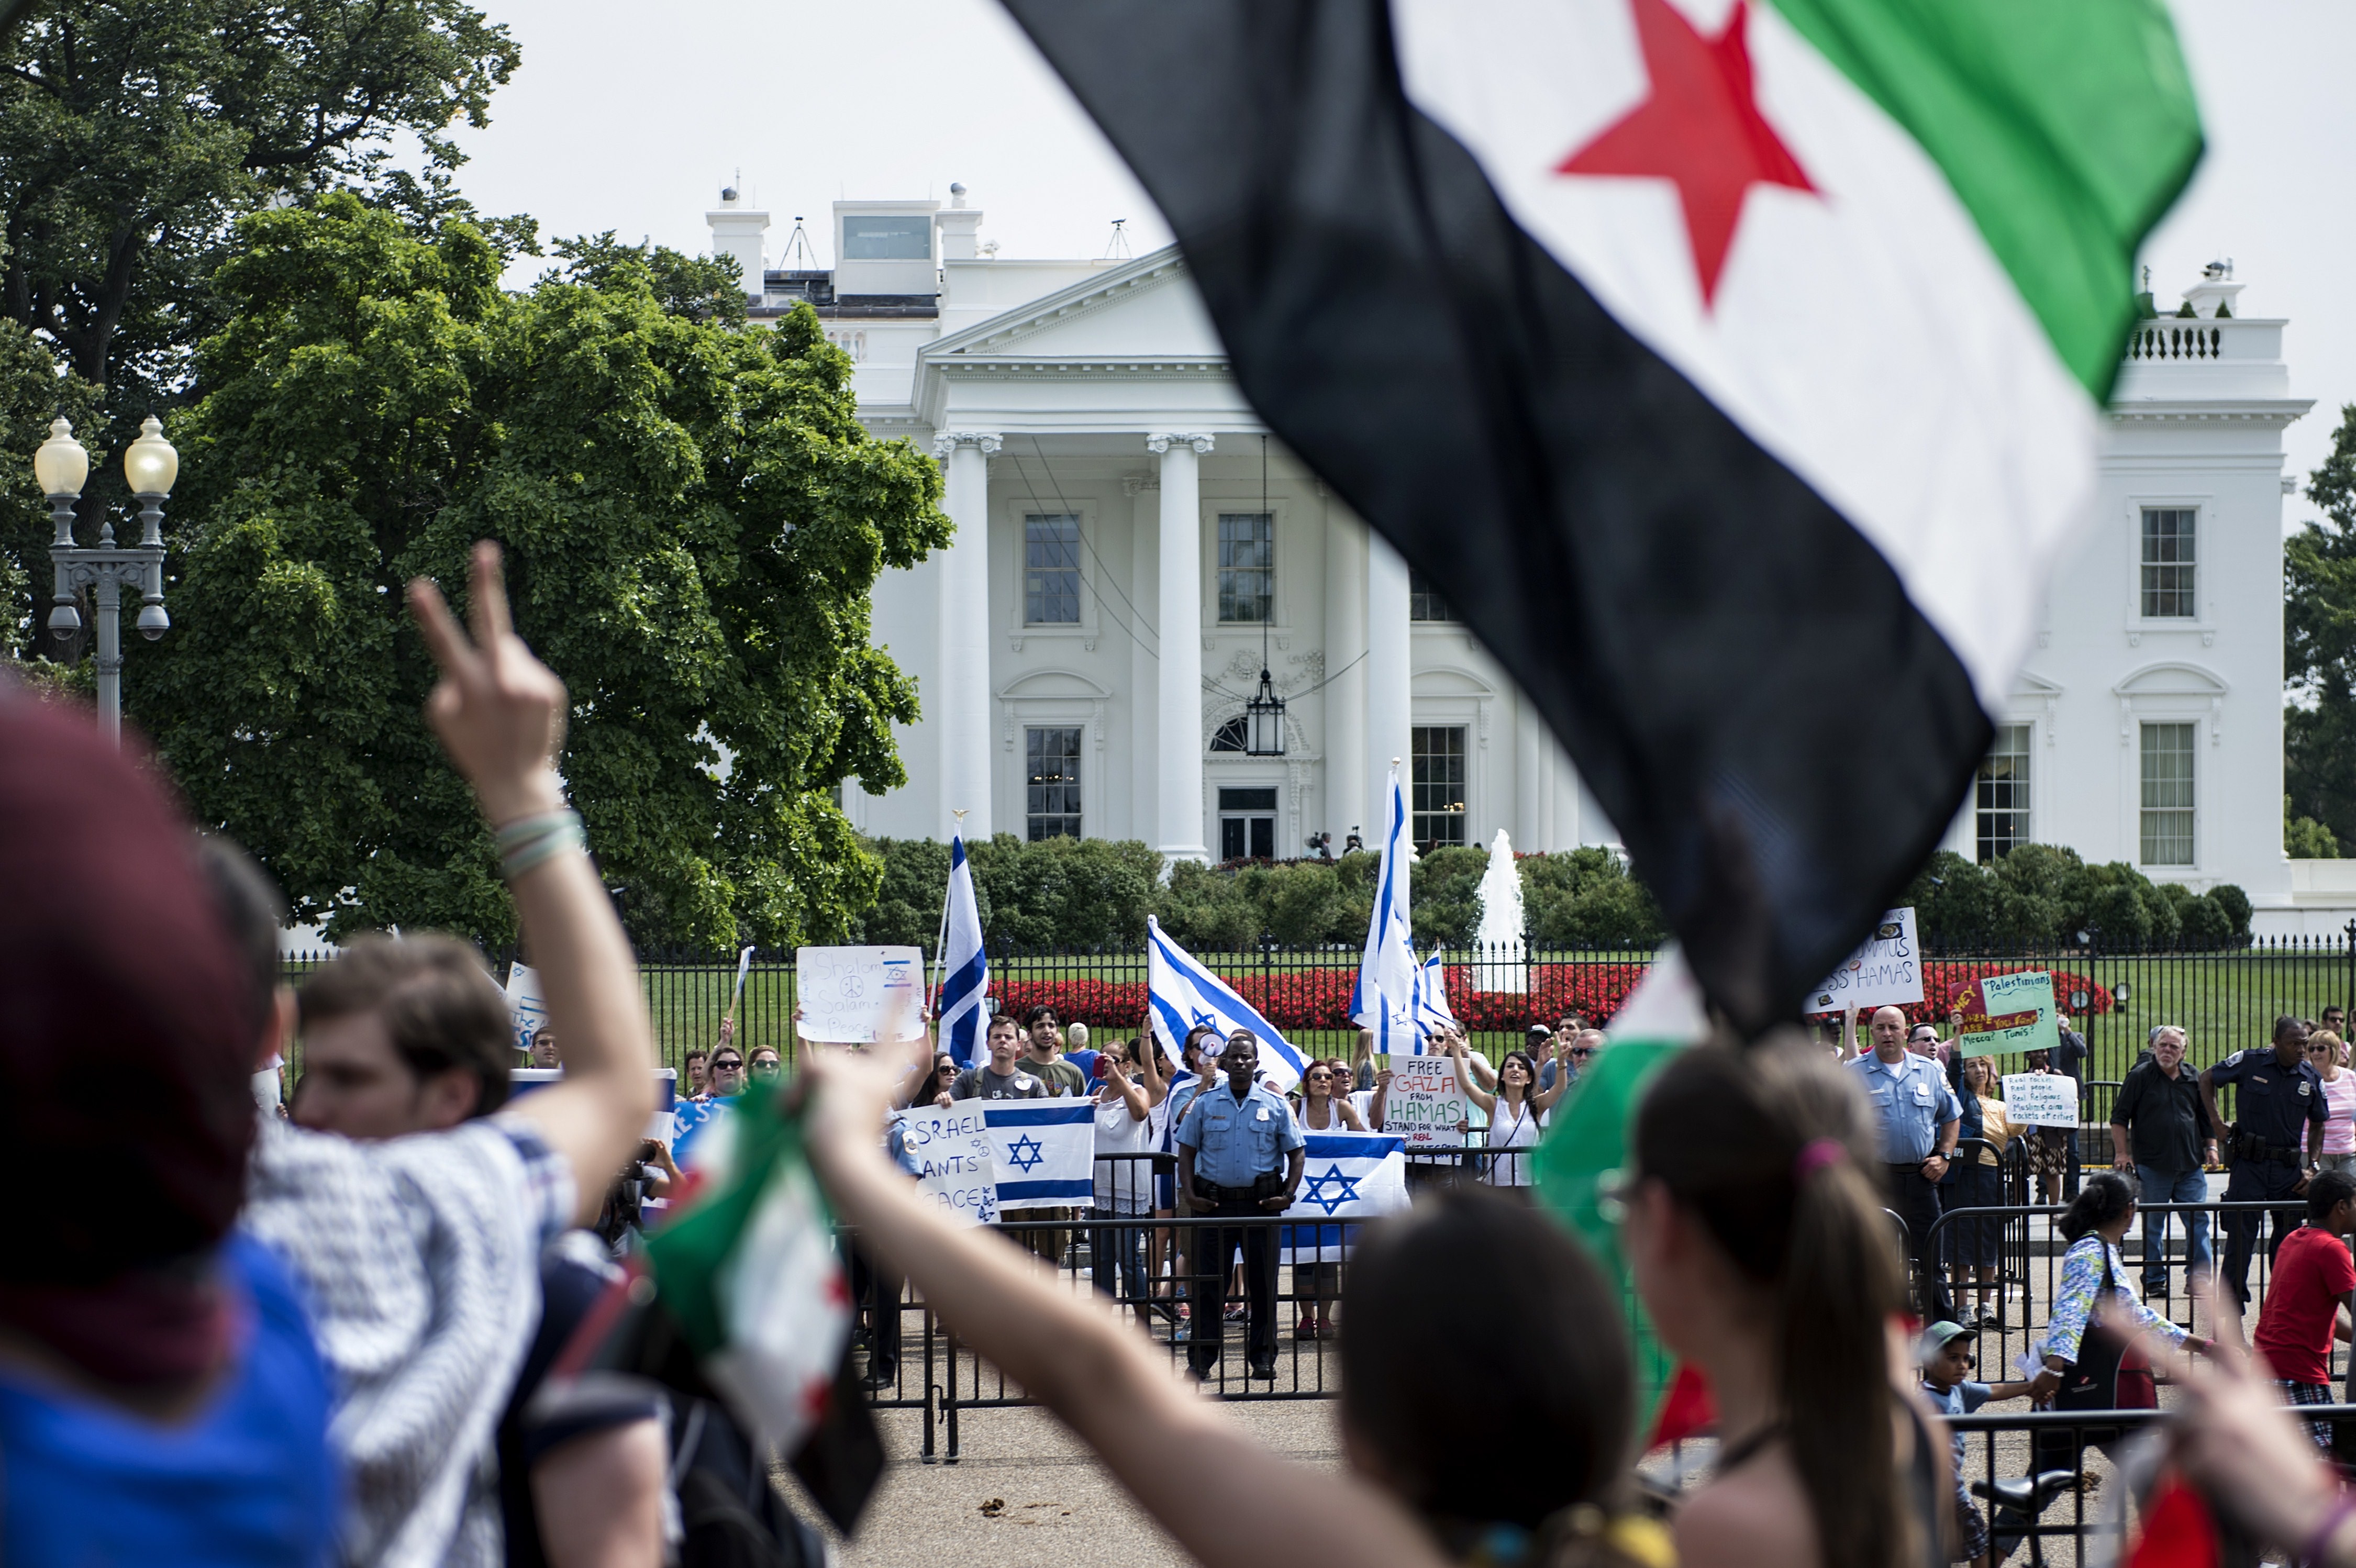 Activists supporting Israel and activists supporting Palestinians in Washington, D.C.